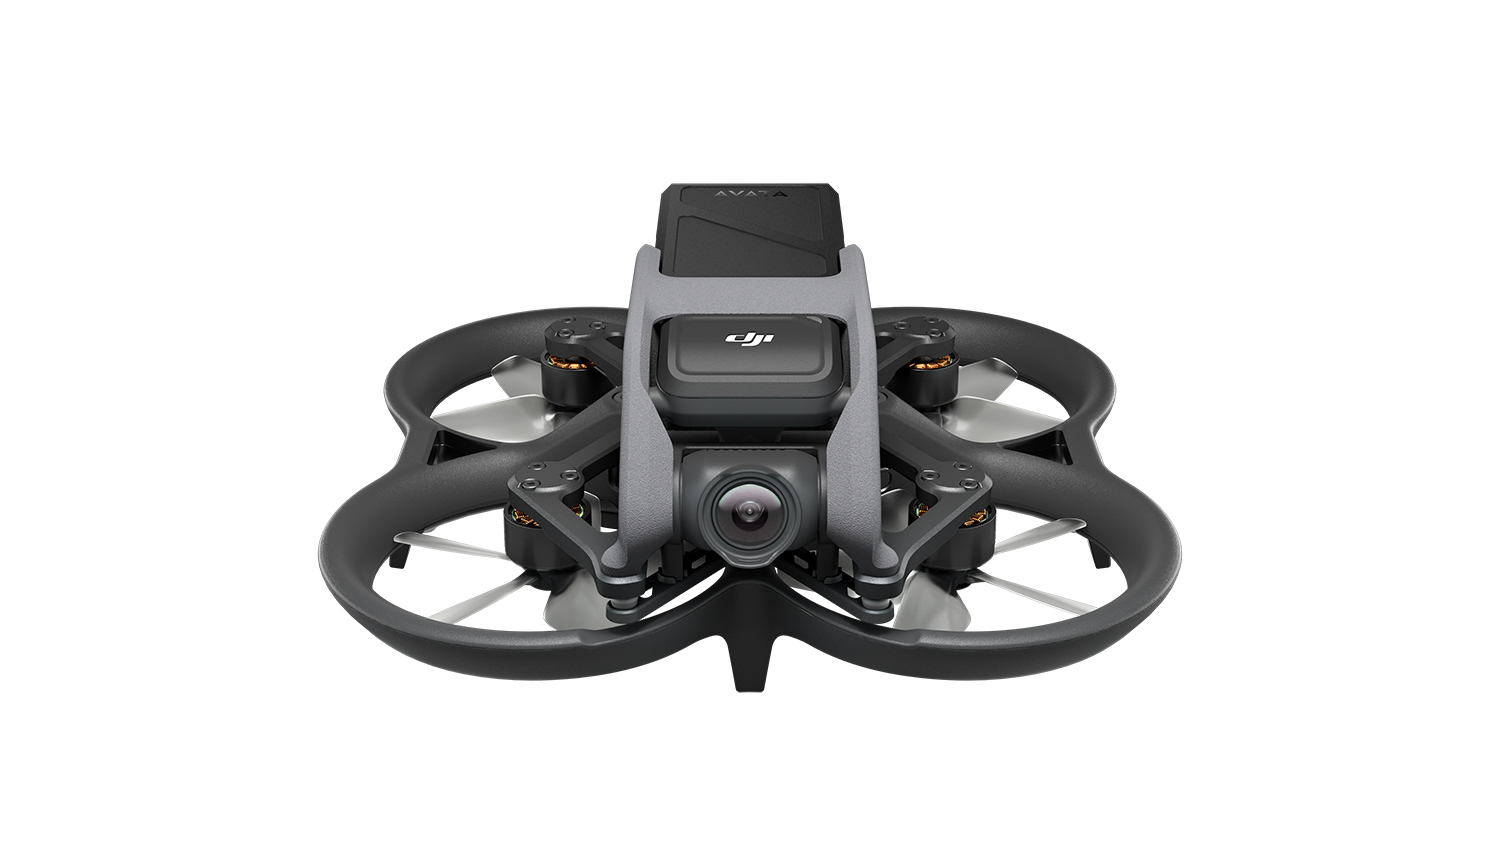 Image of Avata FPV drone from DJI product overview